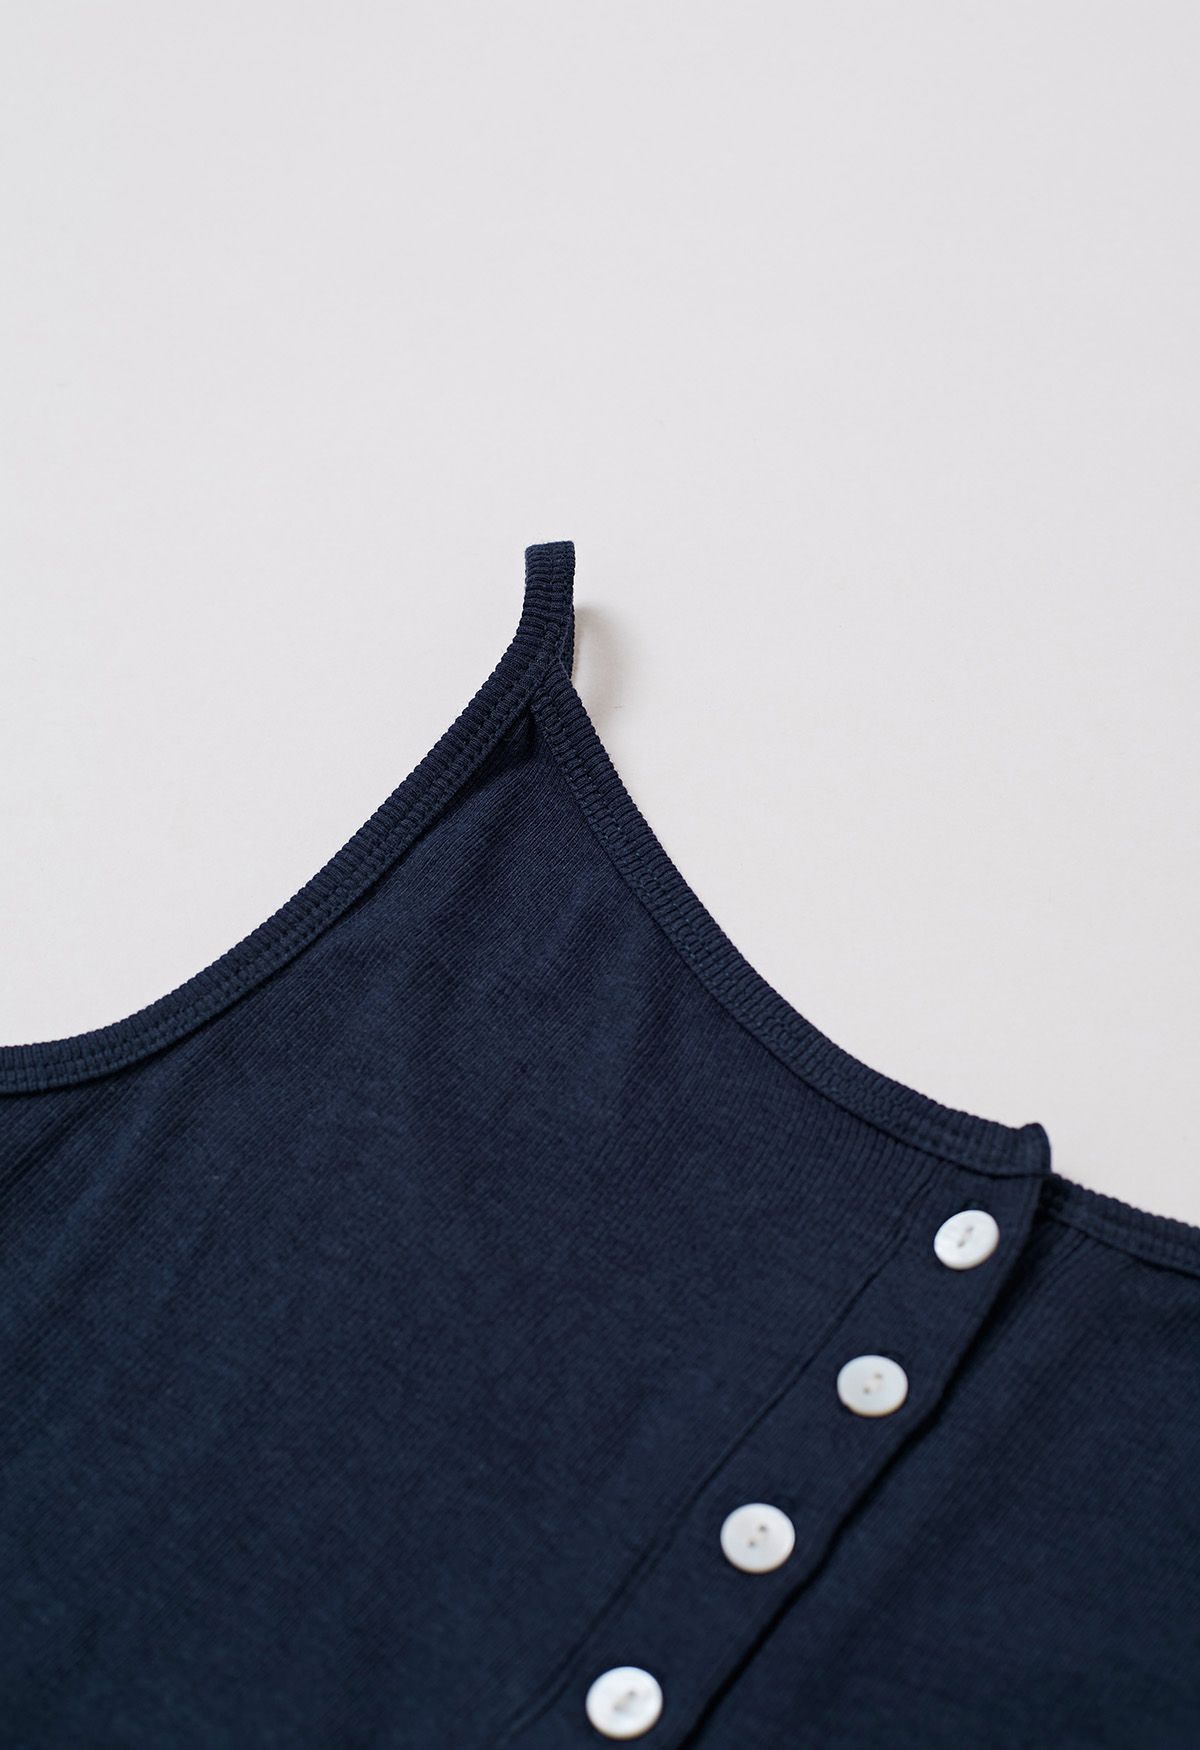 Simplicity Front Buttoned Cami Top in Navy